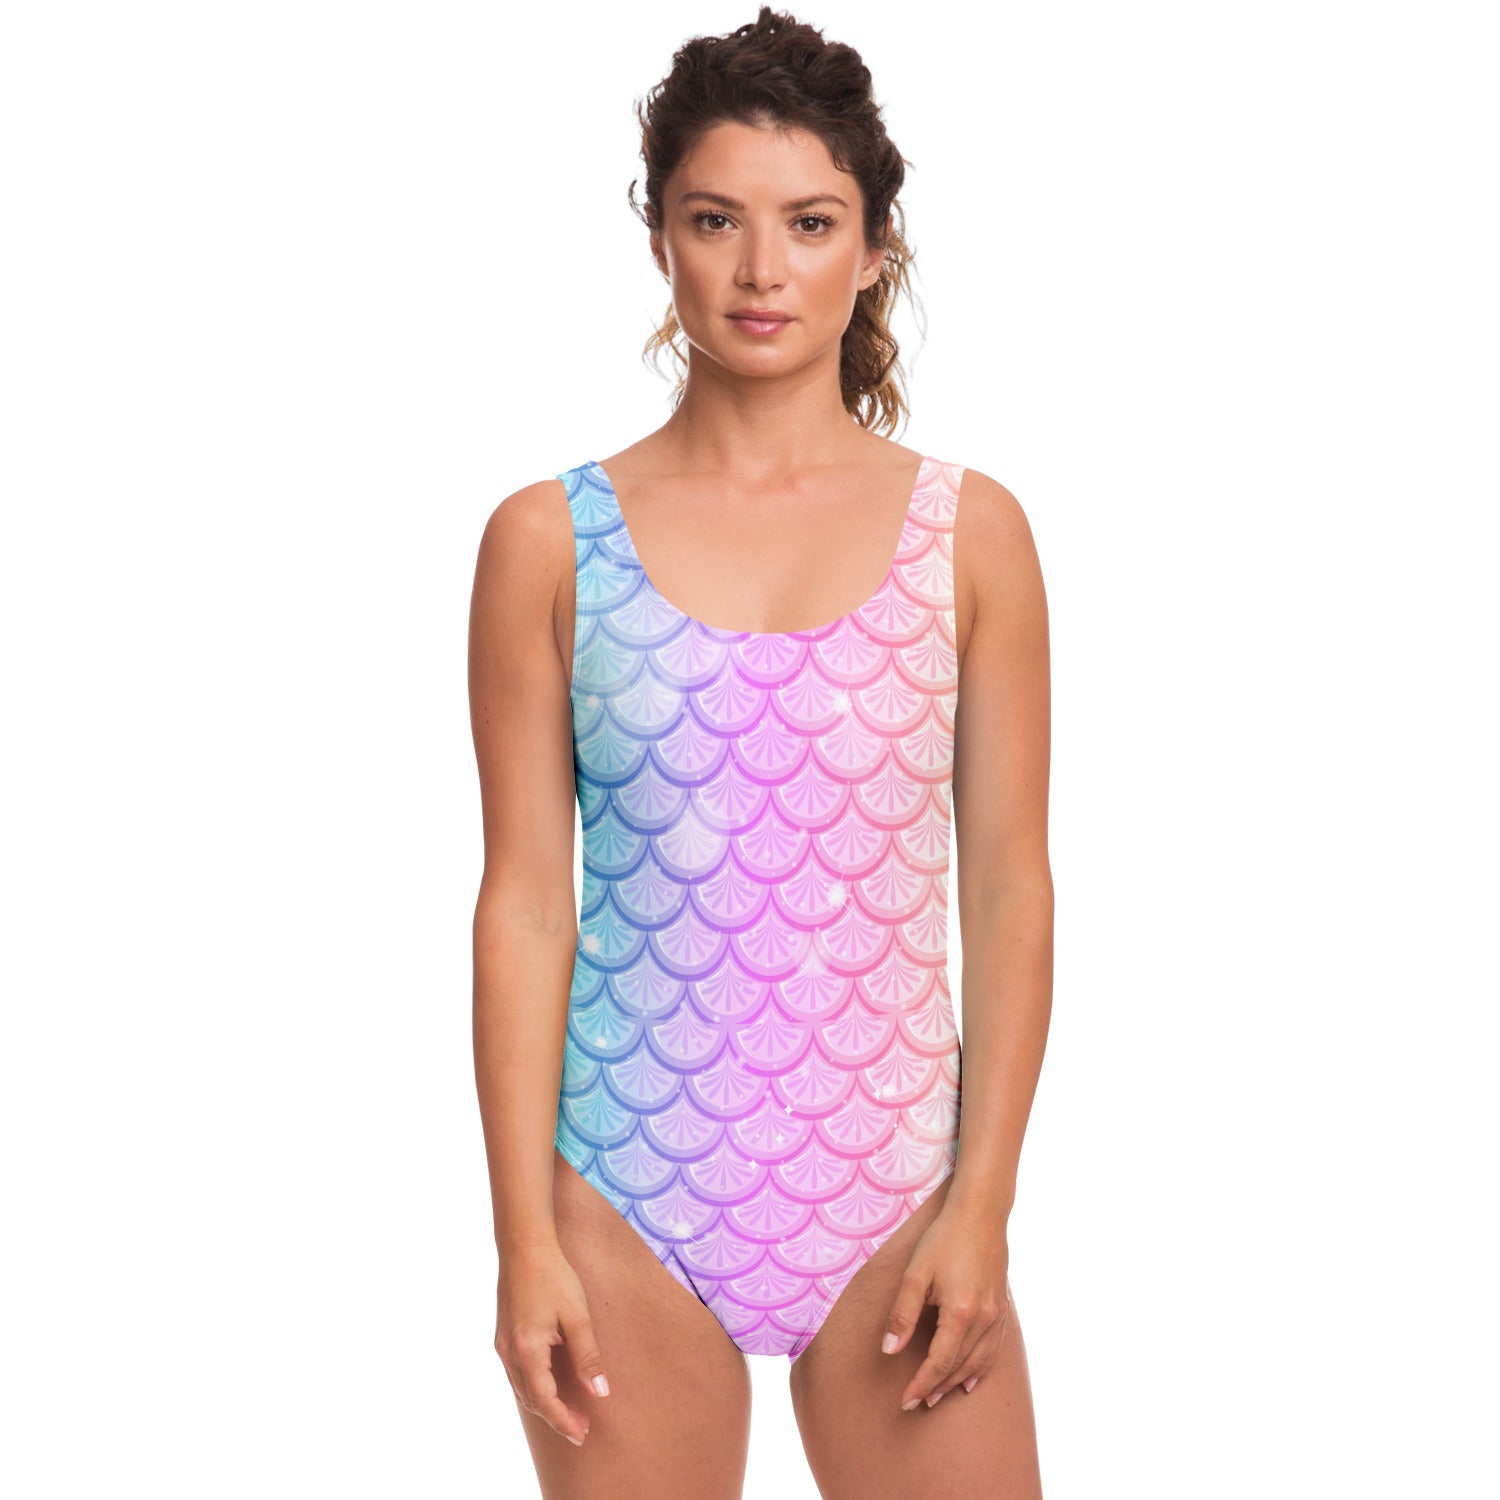 Starcove Fashion Women's Ombre Swimsuit Cover Up